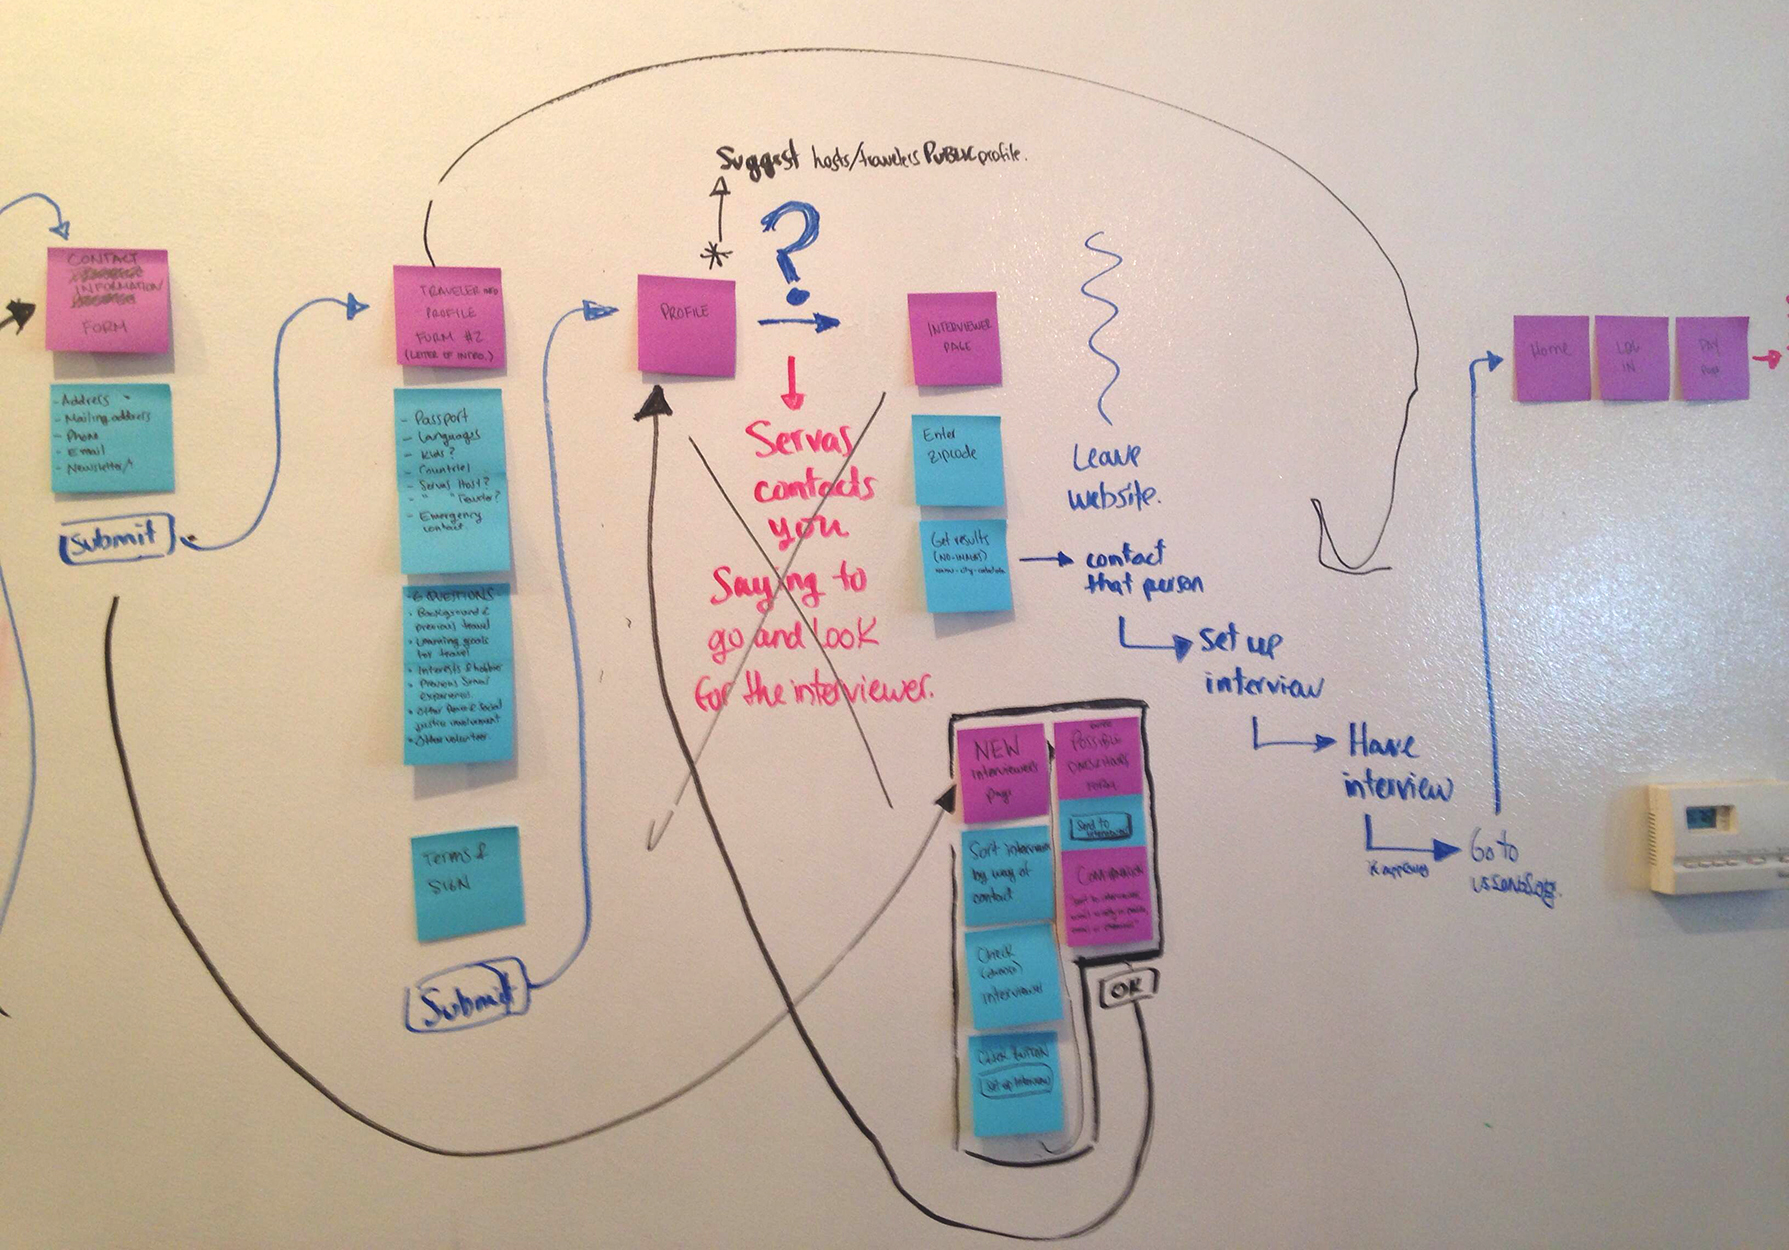 Image of black marker notes on top of the current user flow diagram on the wall